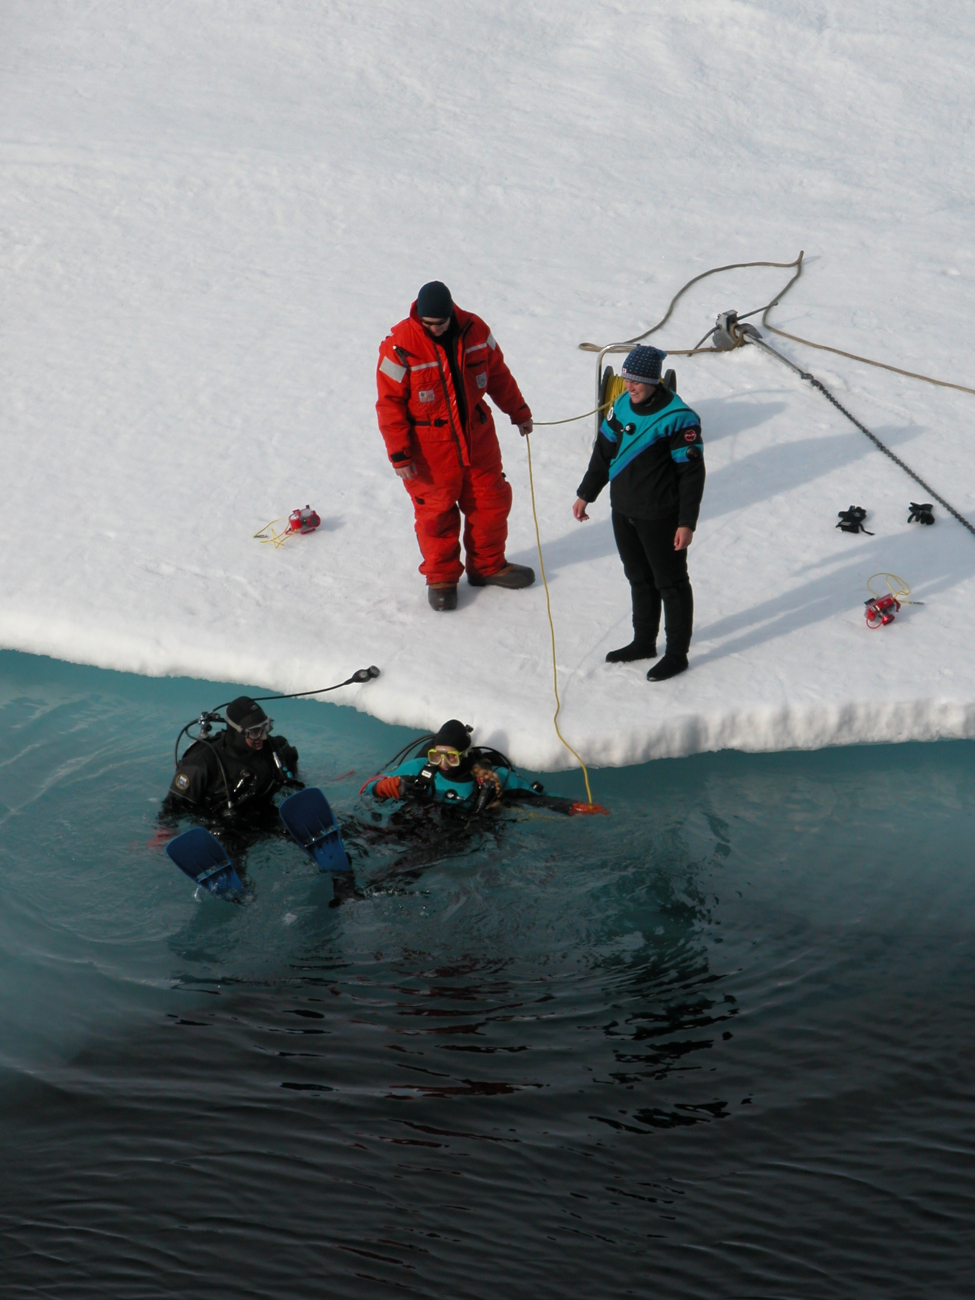 Divers enter icy waters from the edge of an ice floe